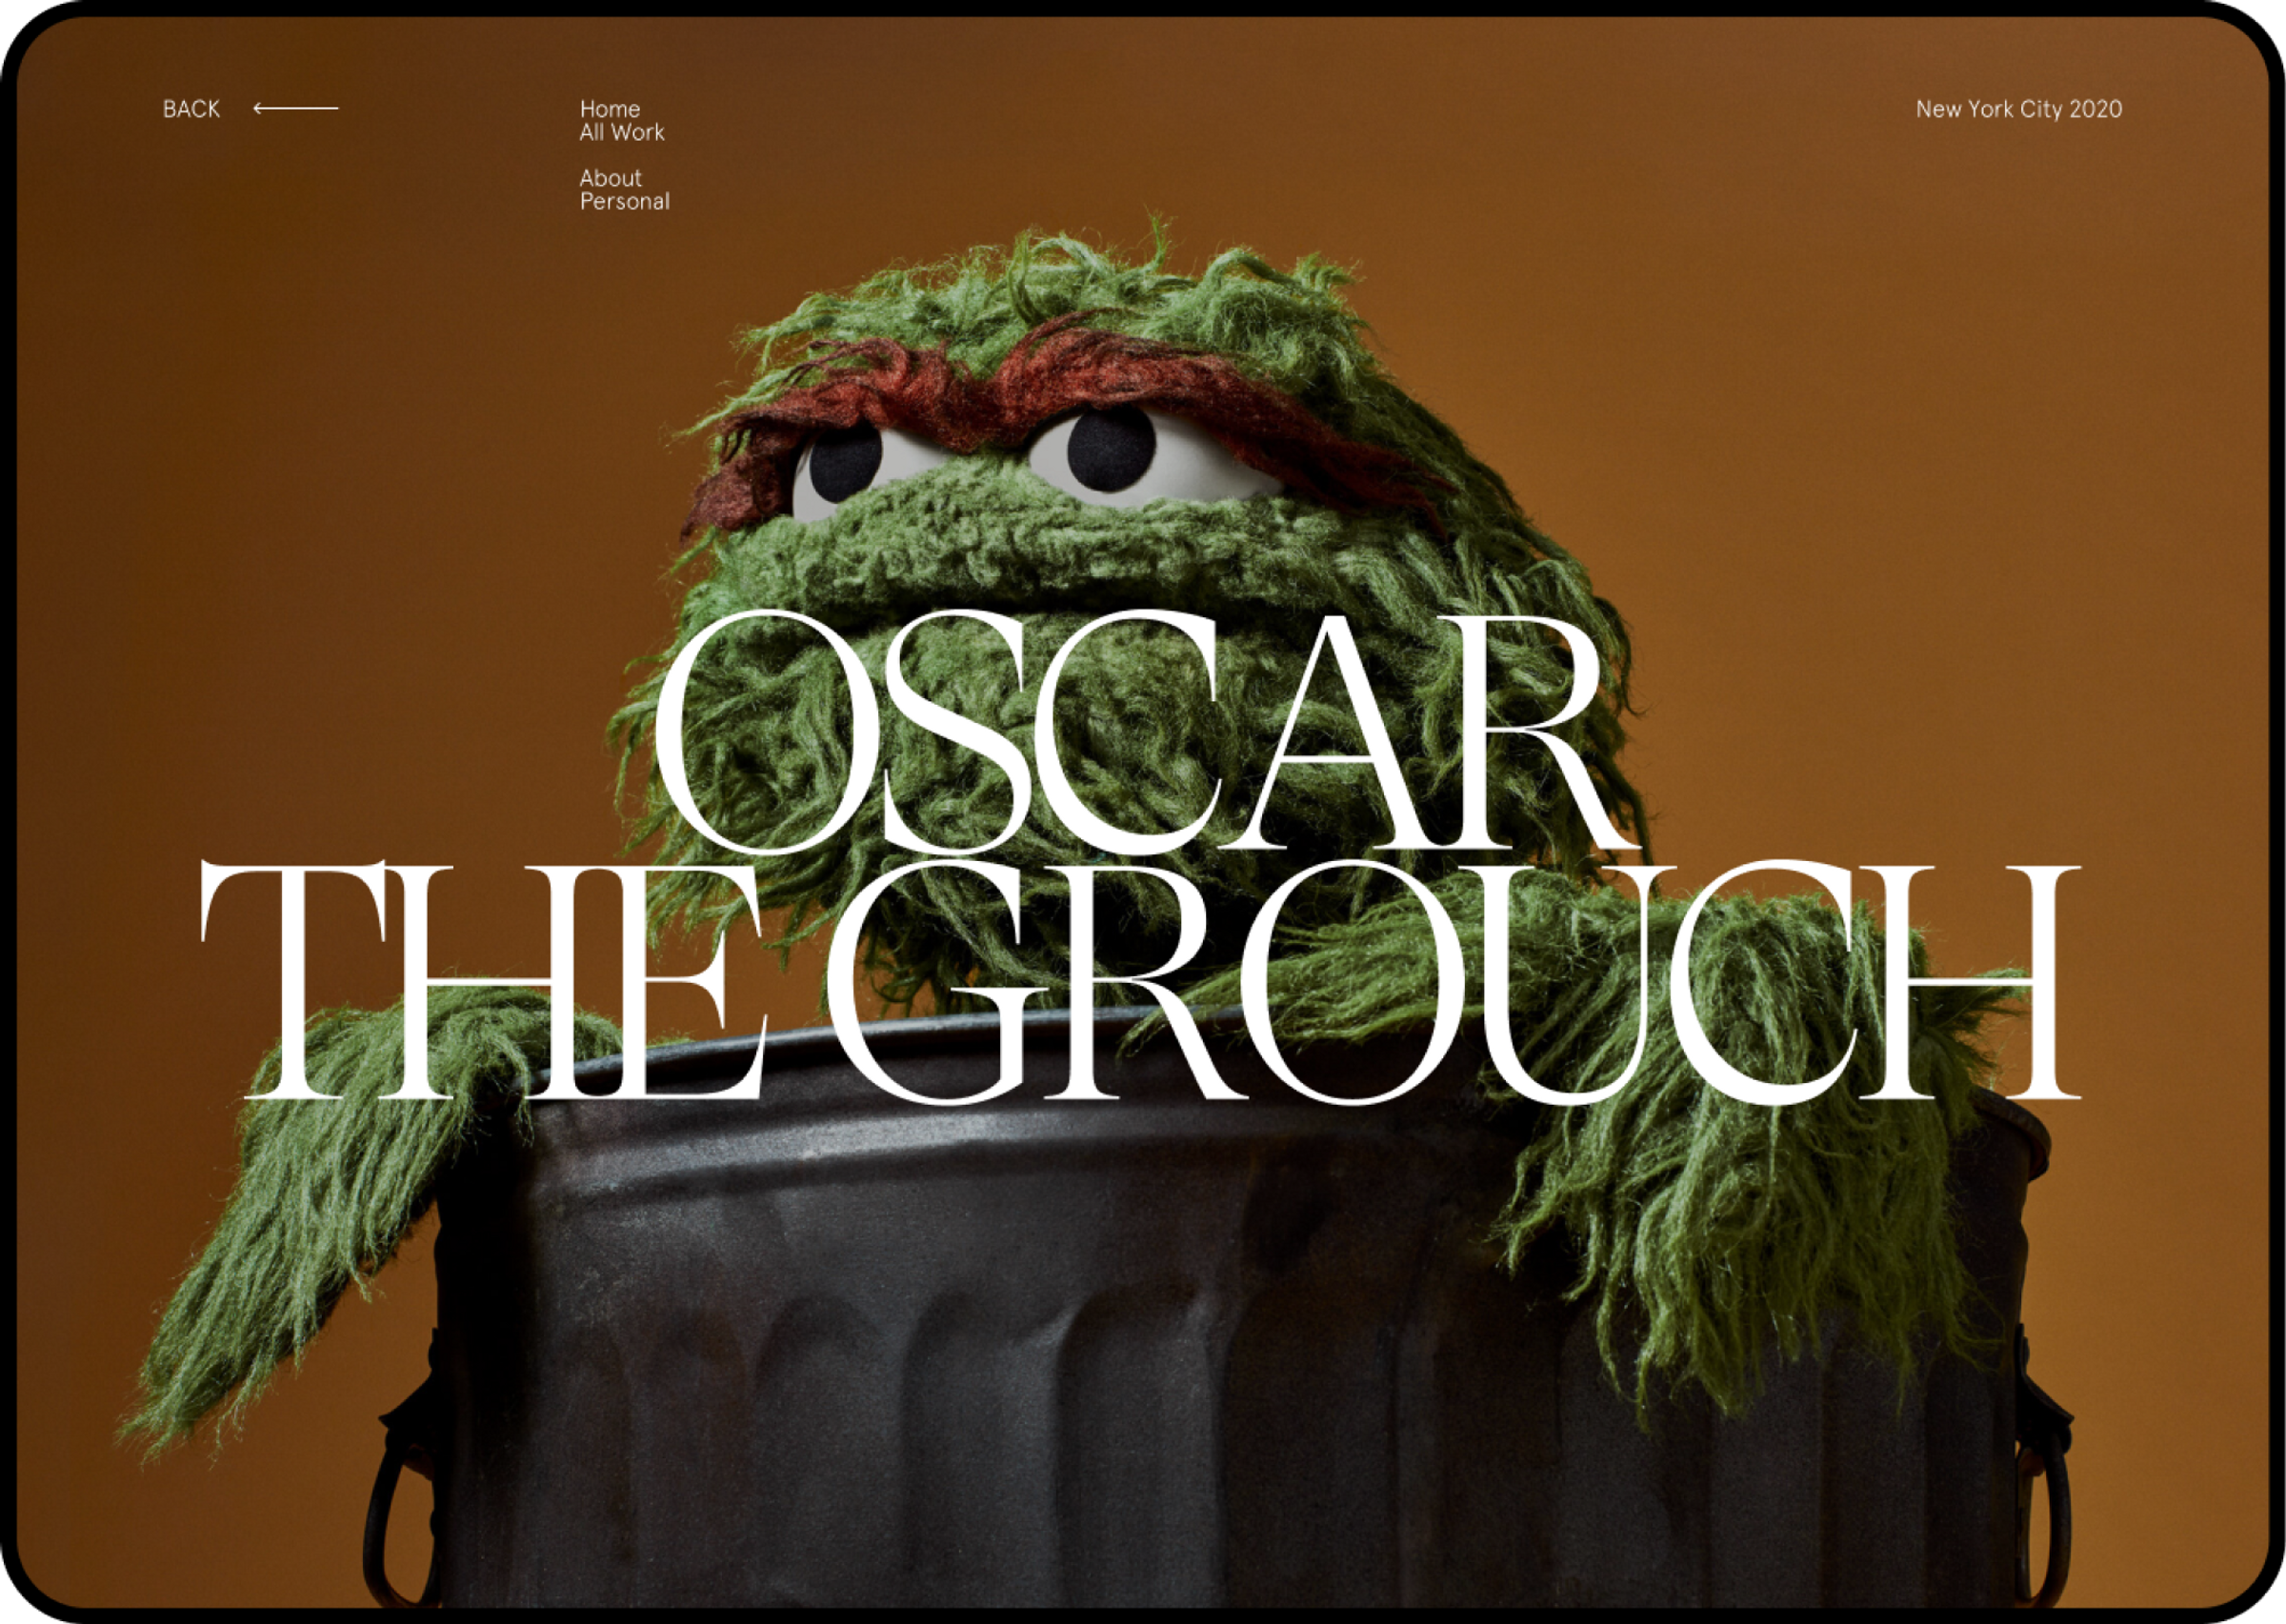 Website comp for Oscar the Grouch project